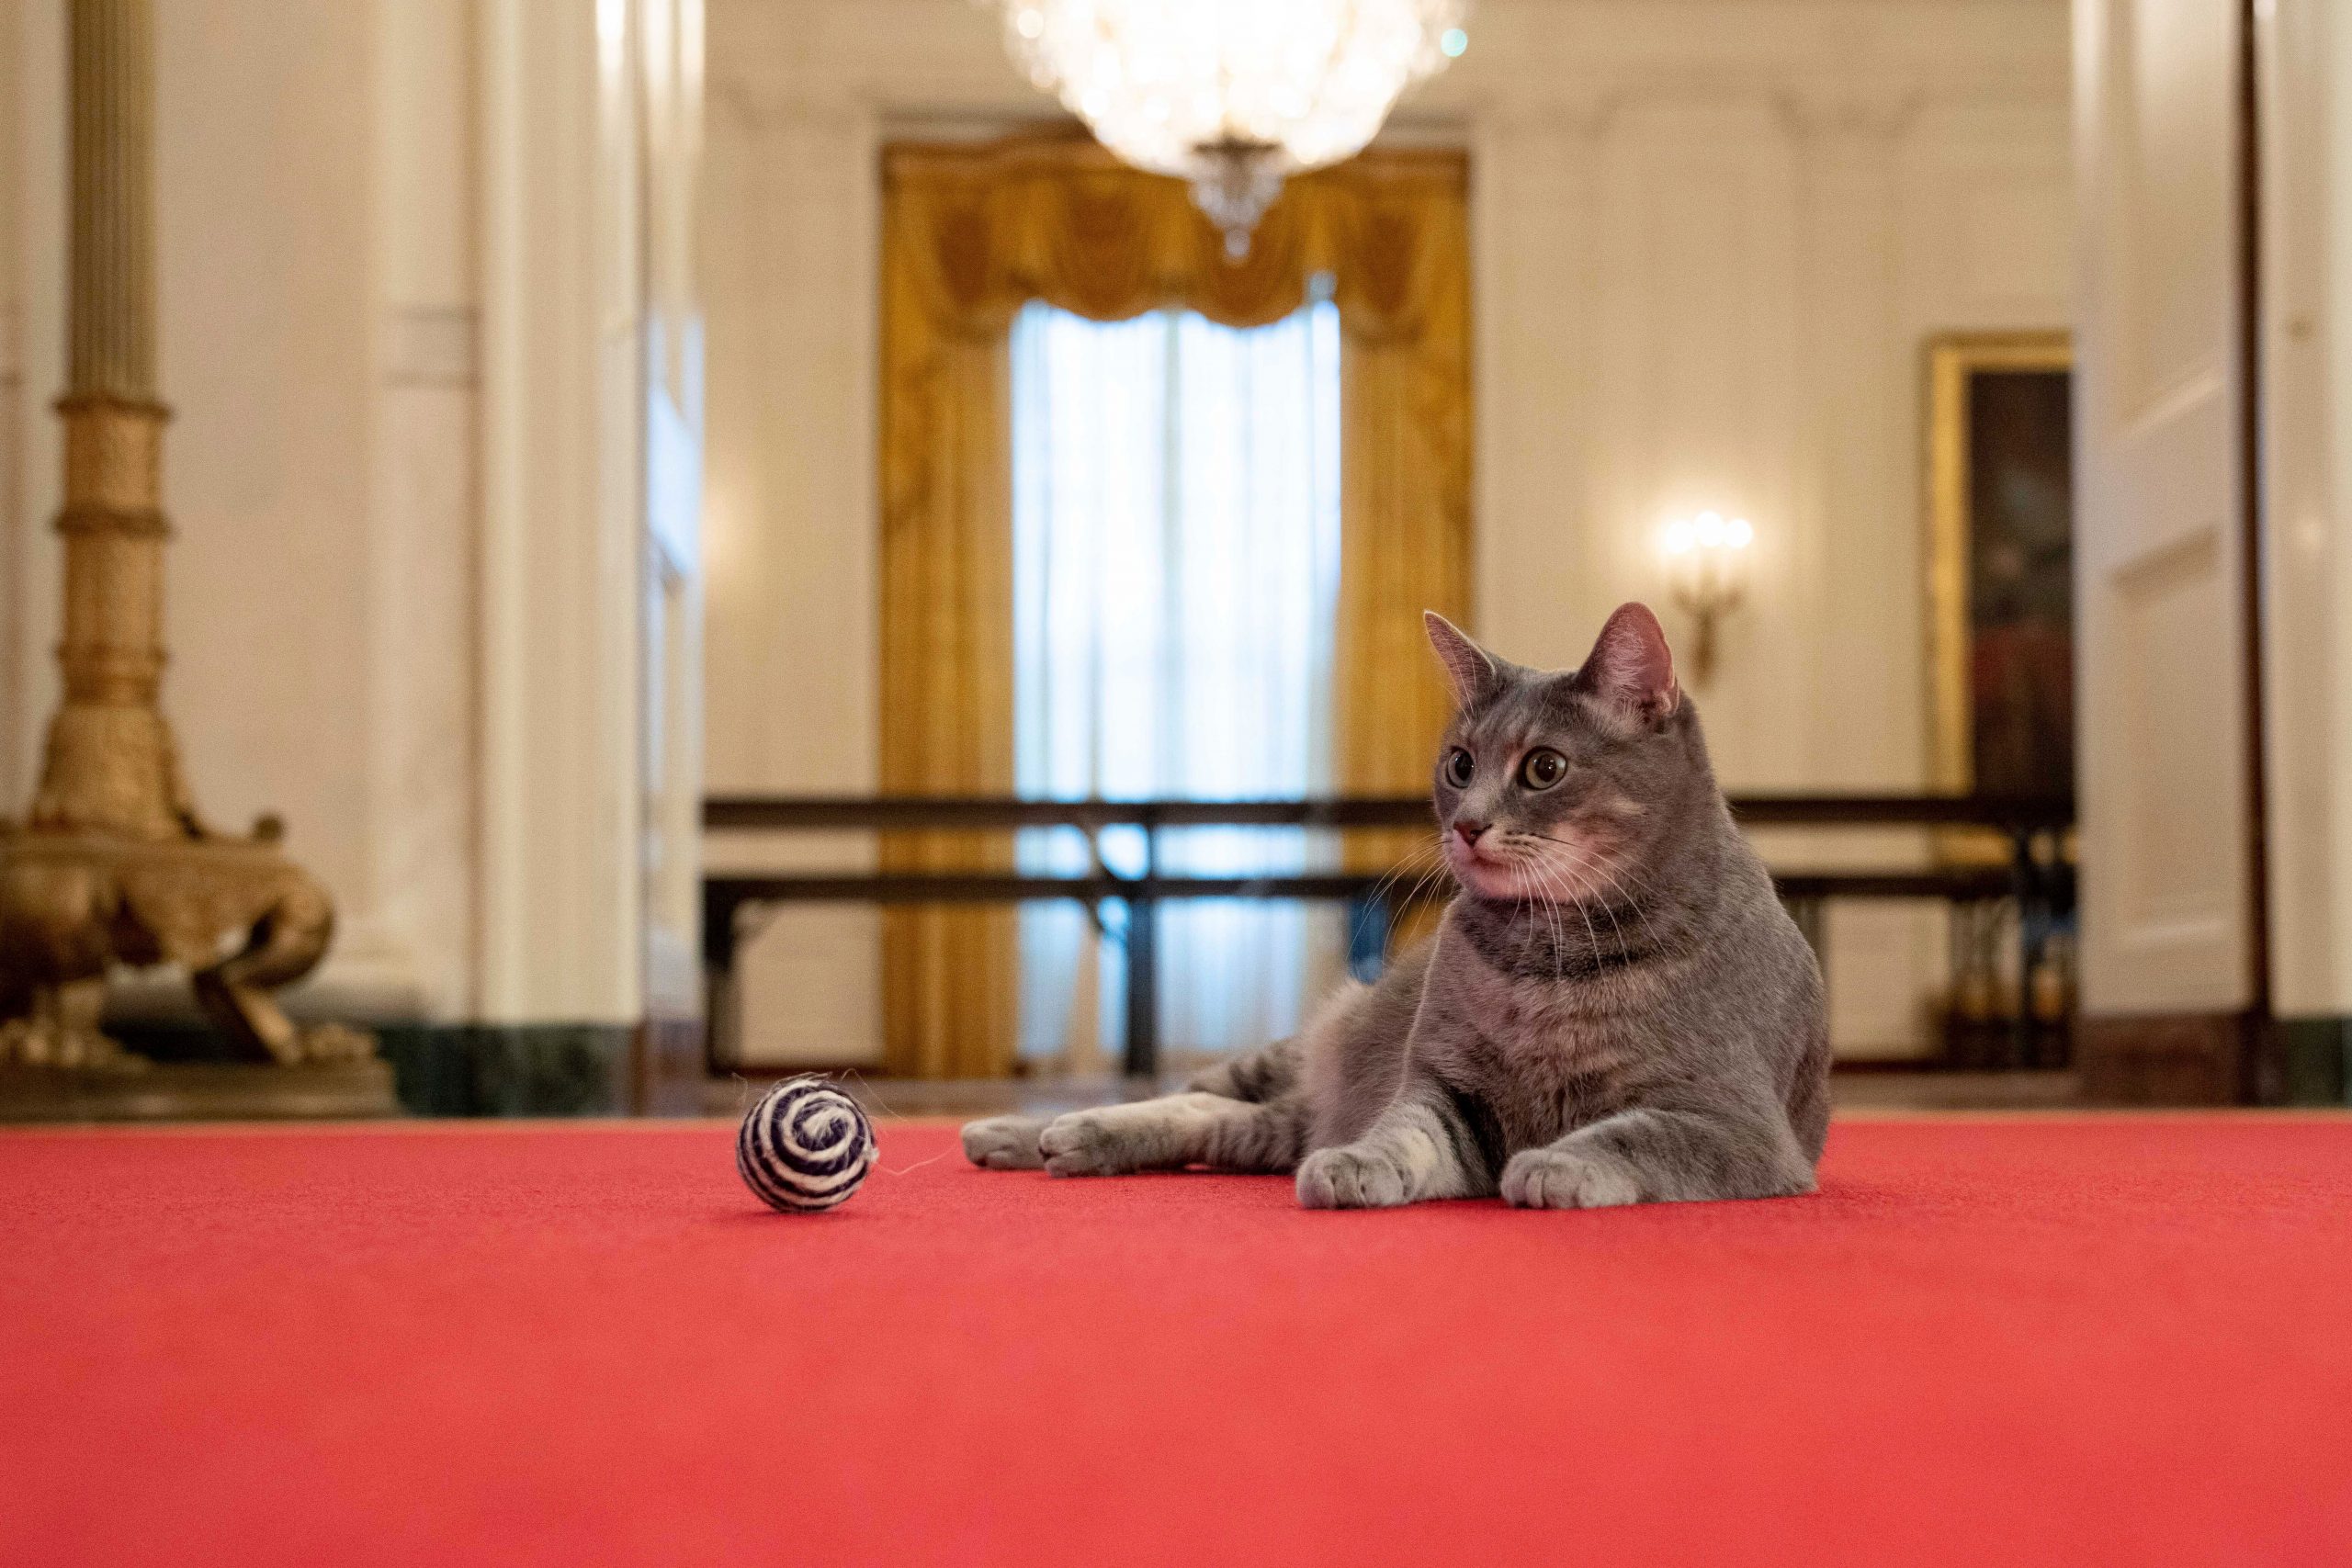 Joe Biden welcomes cat named Willow to White House